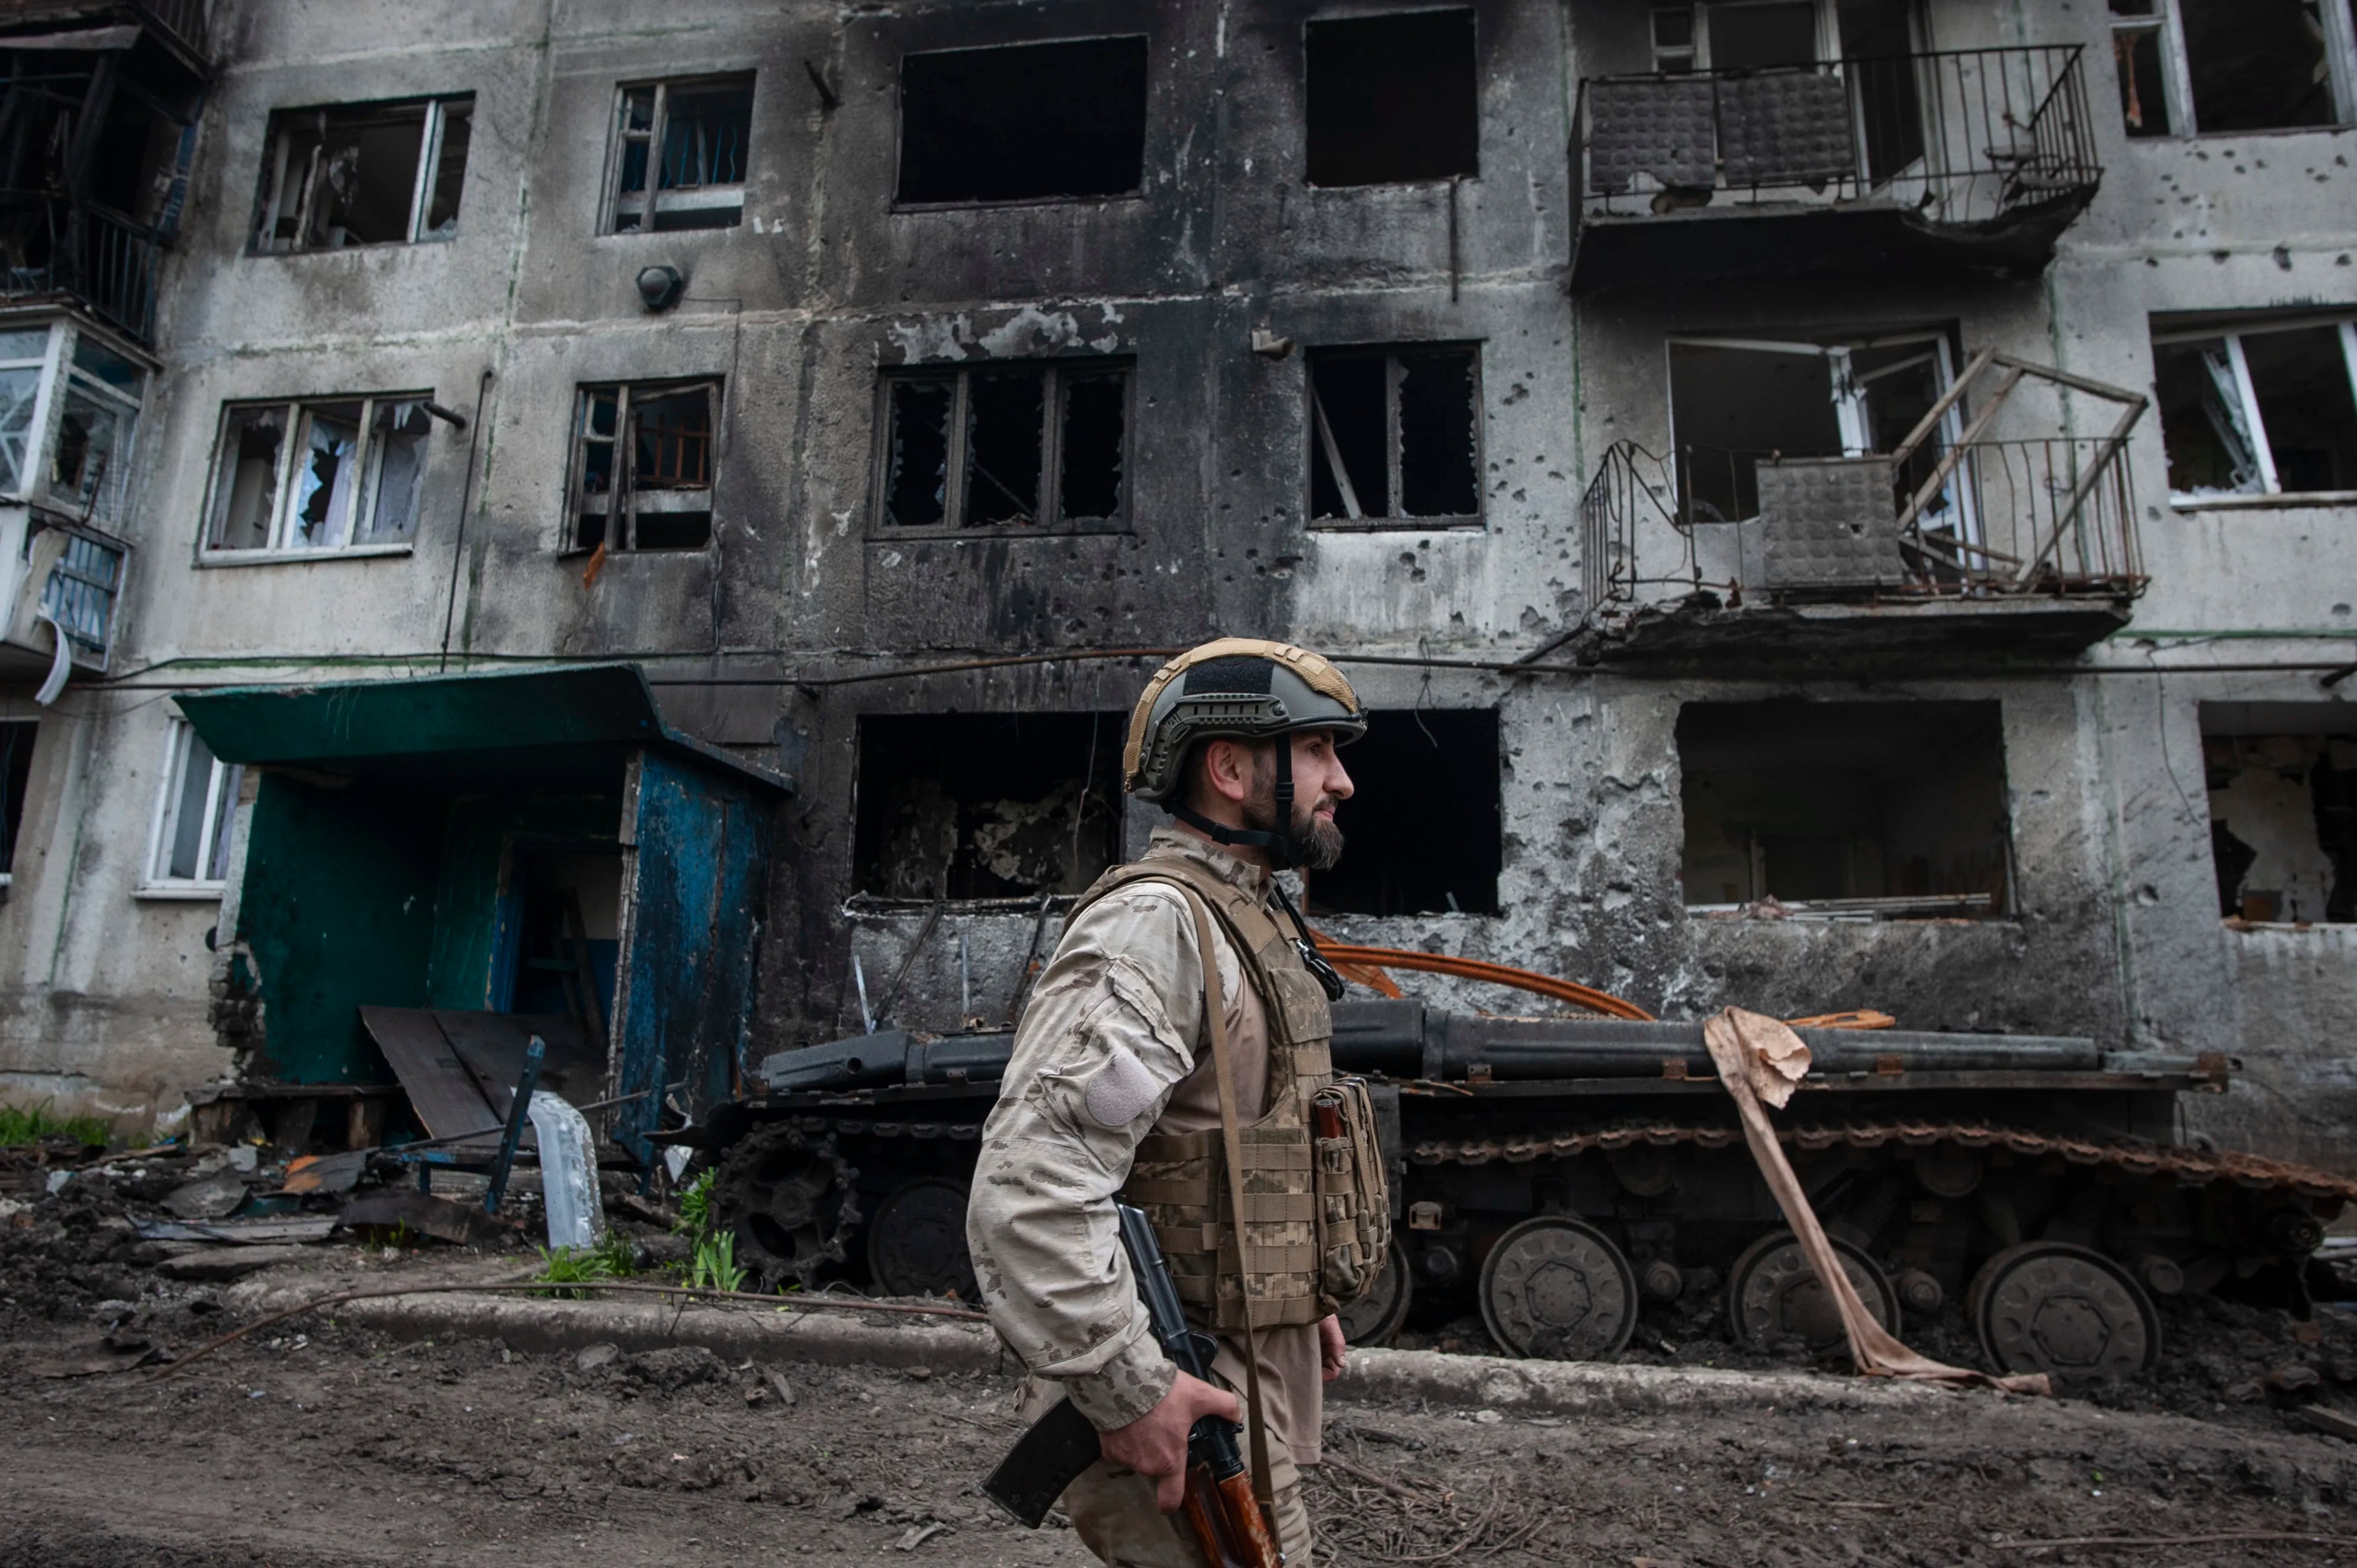 A Ukrainian soldier passes by a damaged apartment building in Chasiv Yar, the site of heavy battles with the Russian forces in the Donetsk region, Ukraine.